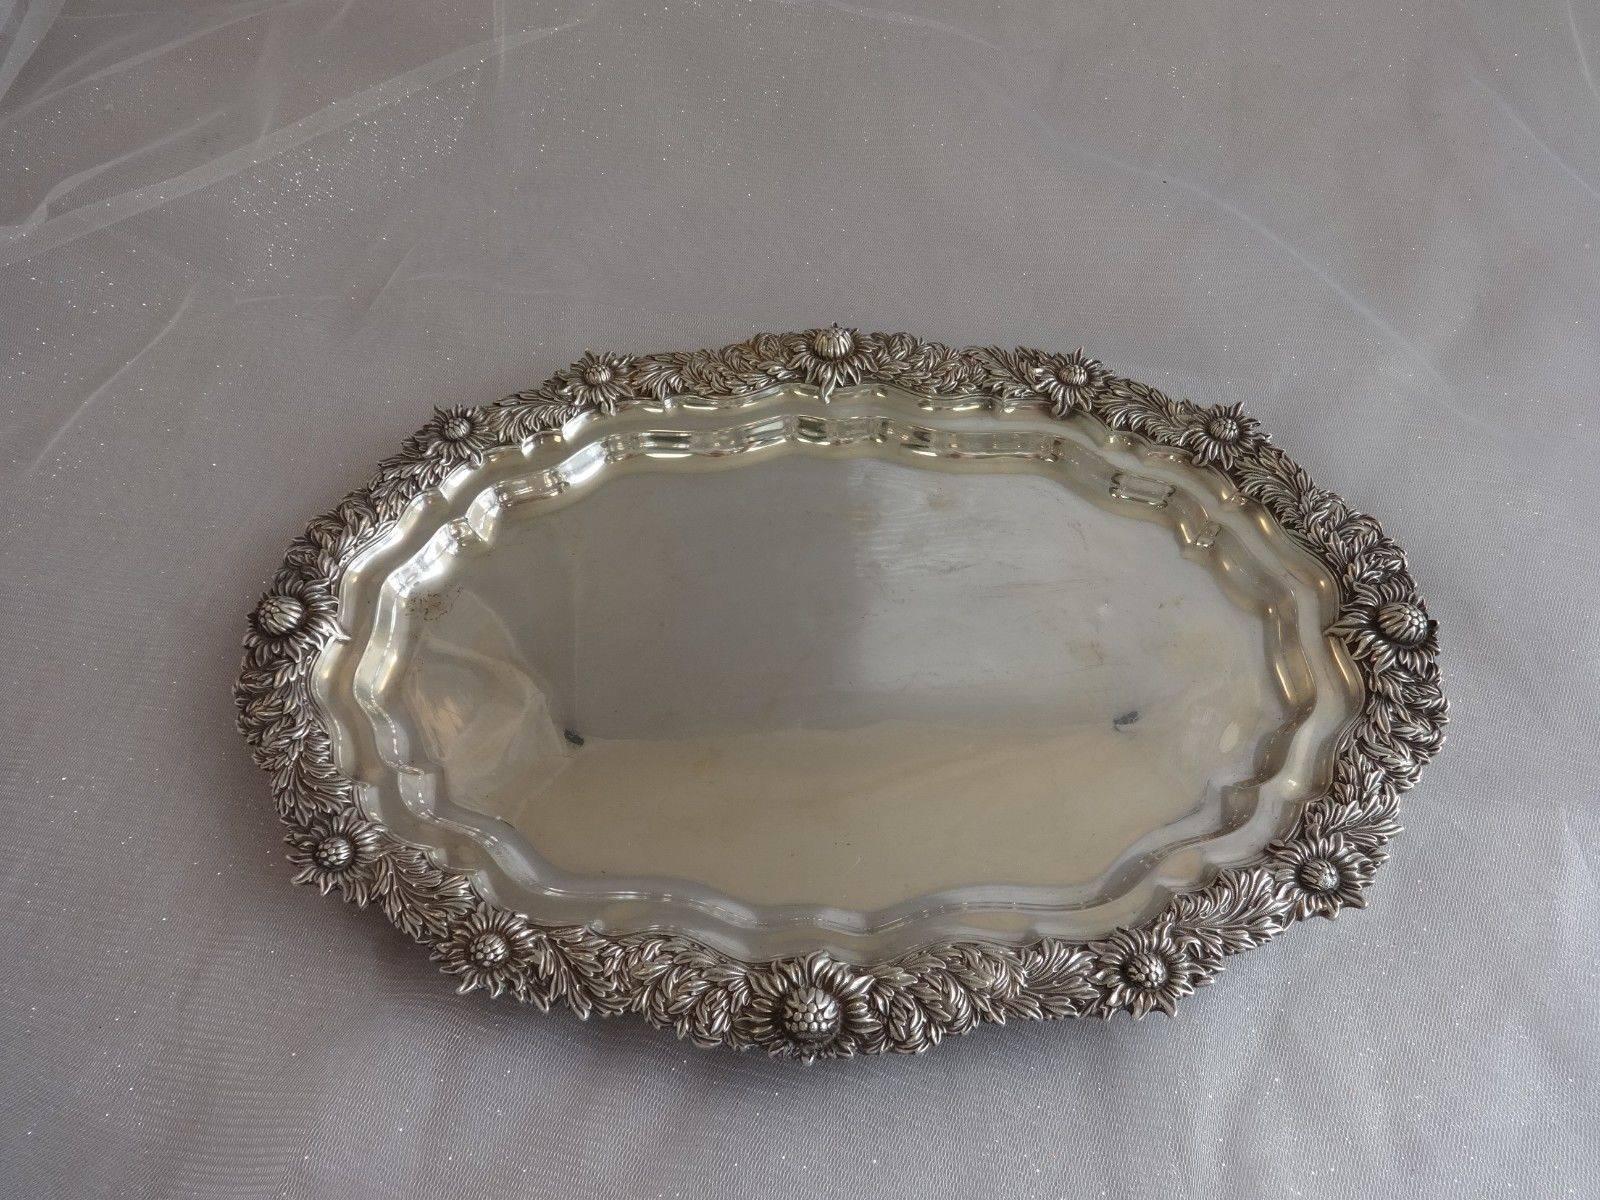 Chrysanthemum by Tiffany & Co. Sterling Silver Oval Tray 1